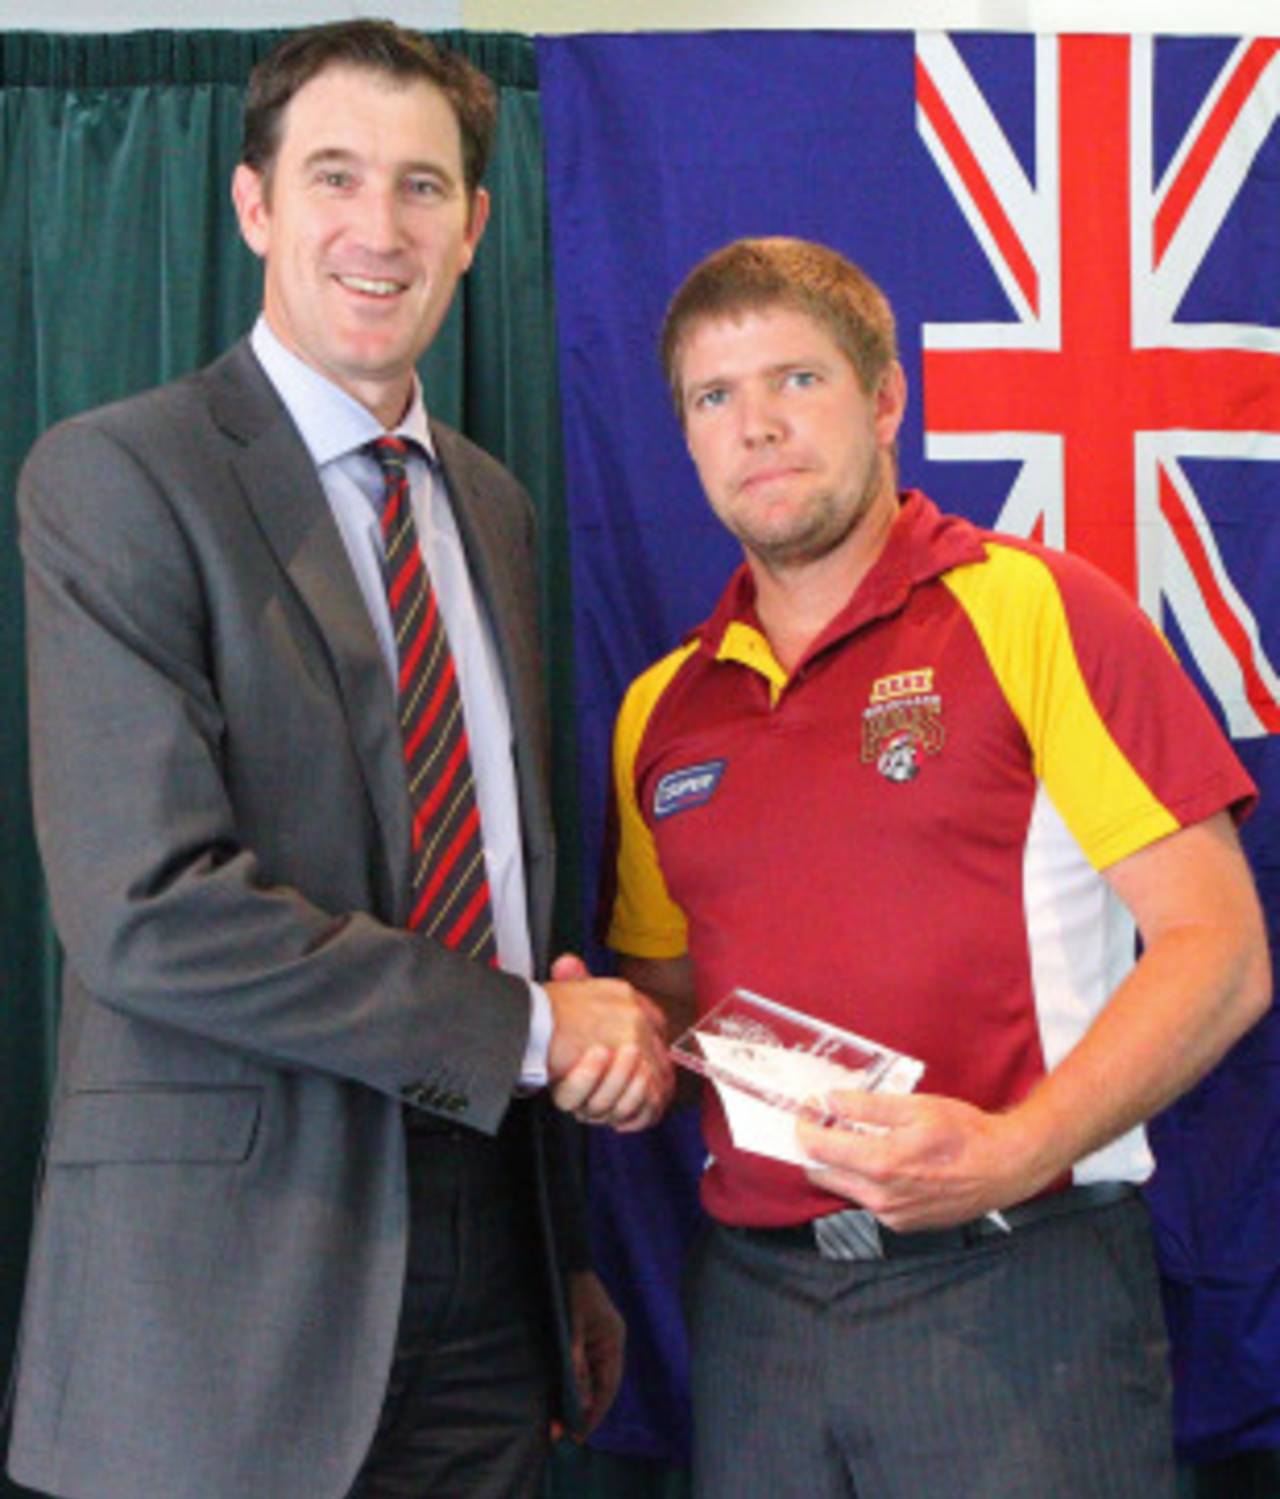 James Hopes receives the Sheffield Shield Player of the Series Award from Cricket Australia chief James Sutherland, March 15, 2011